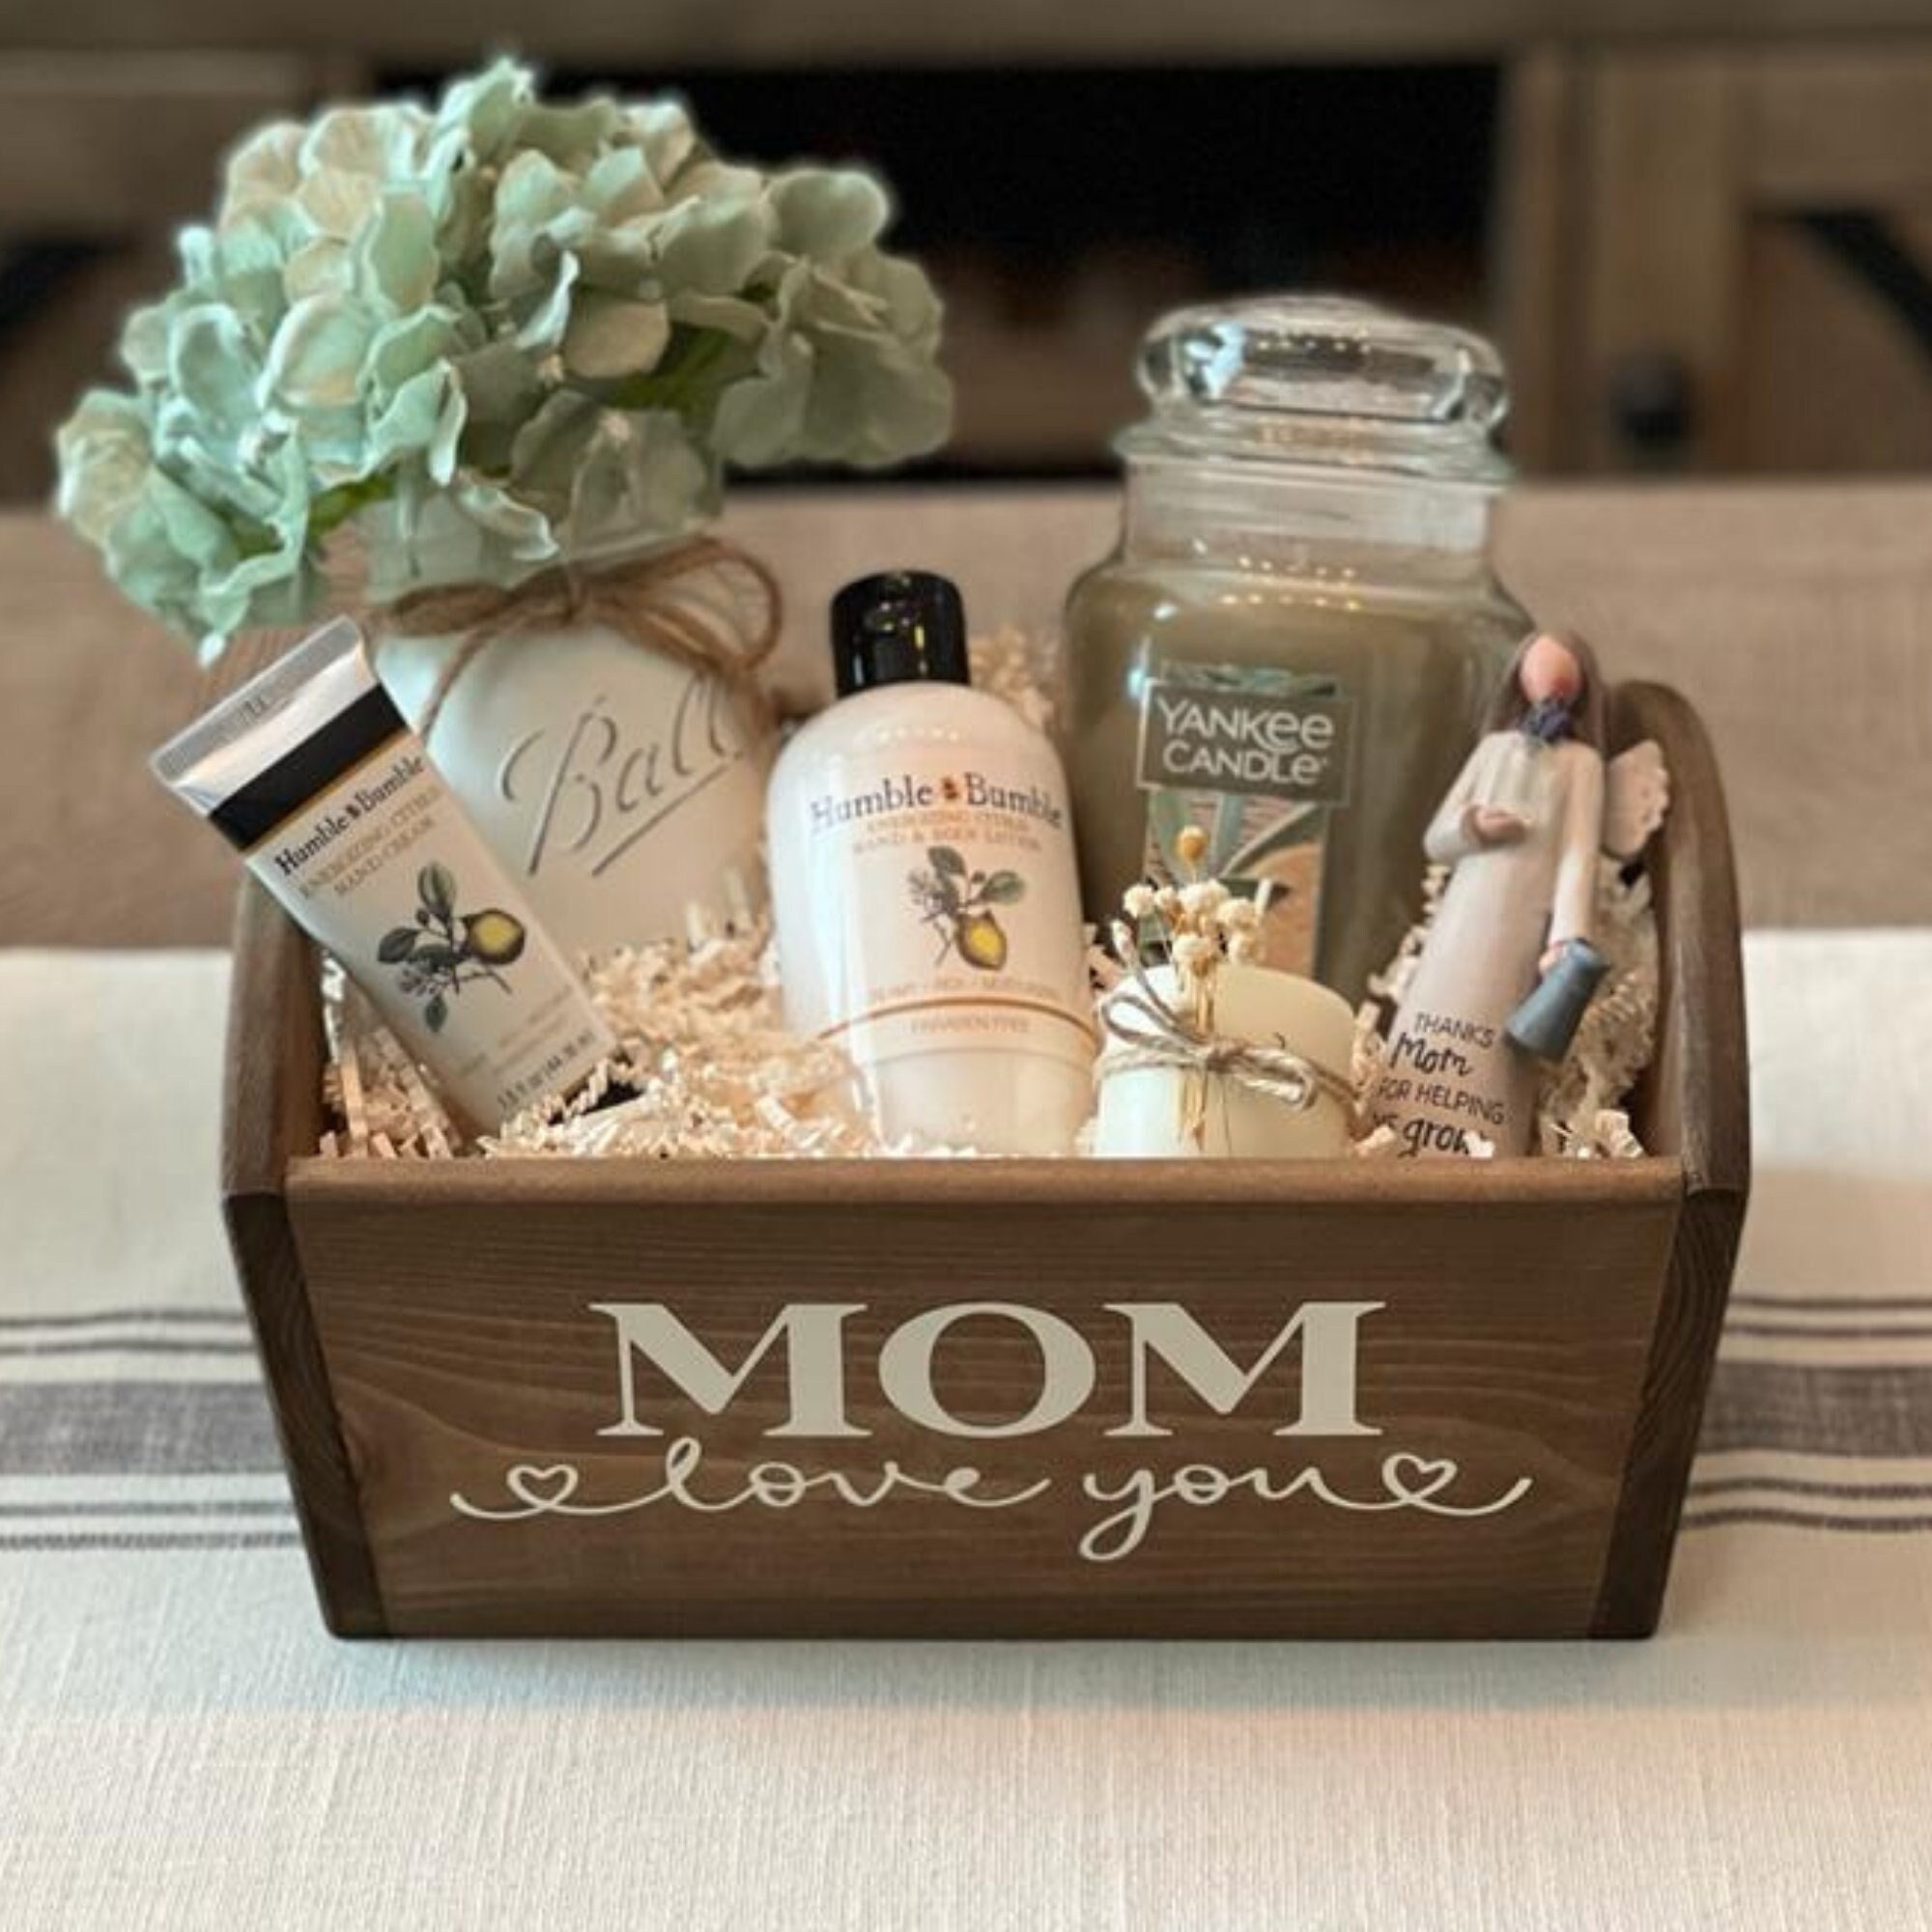 Mothers Day Gift Basket Mom Gift From Daughter Mom Gift Box Mom Birthday  Gift for Mom Gift Ideas EB3250RSGMOM Mom GIFT SET 